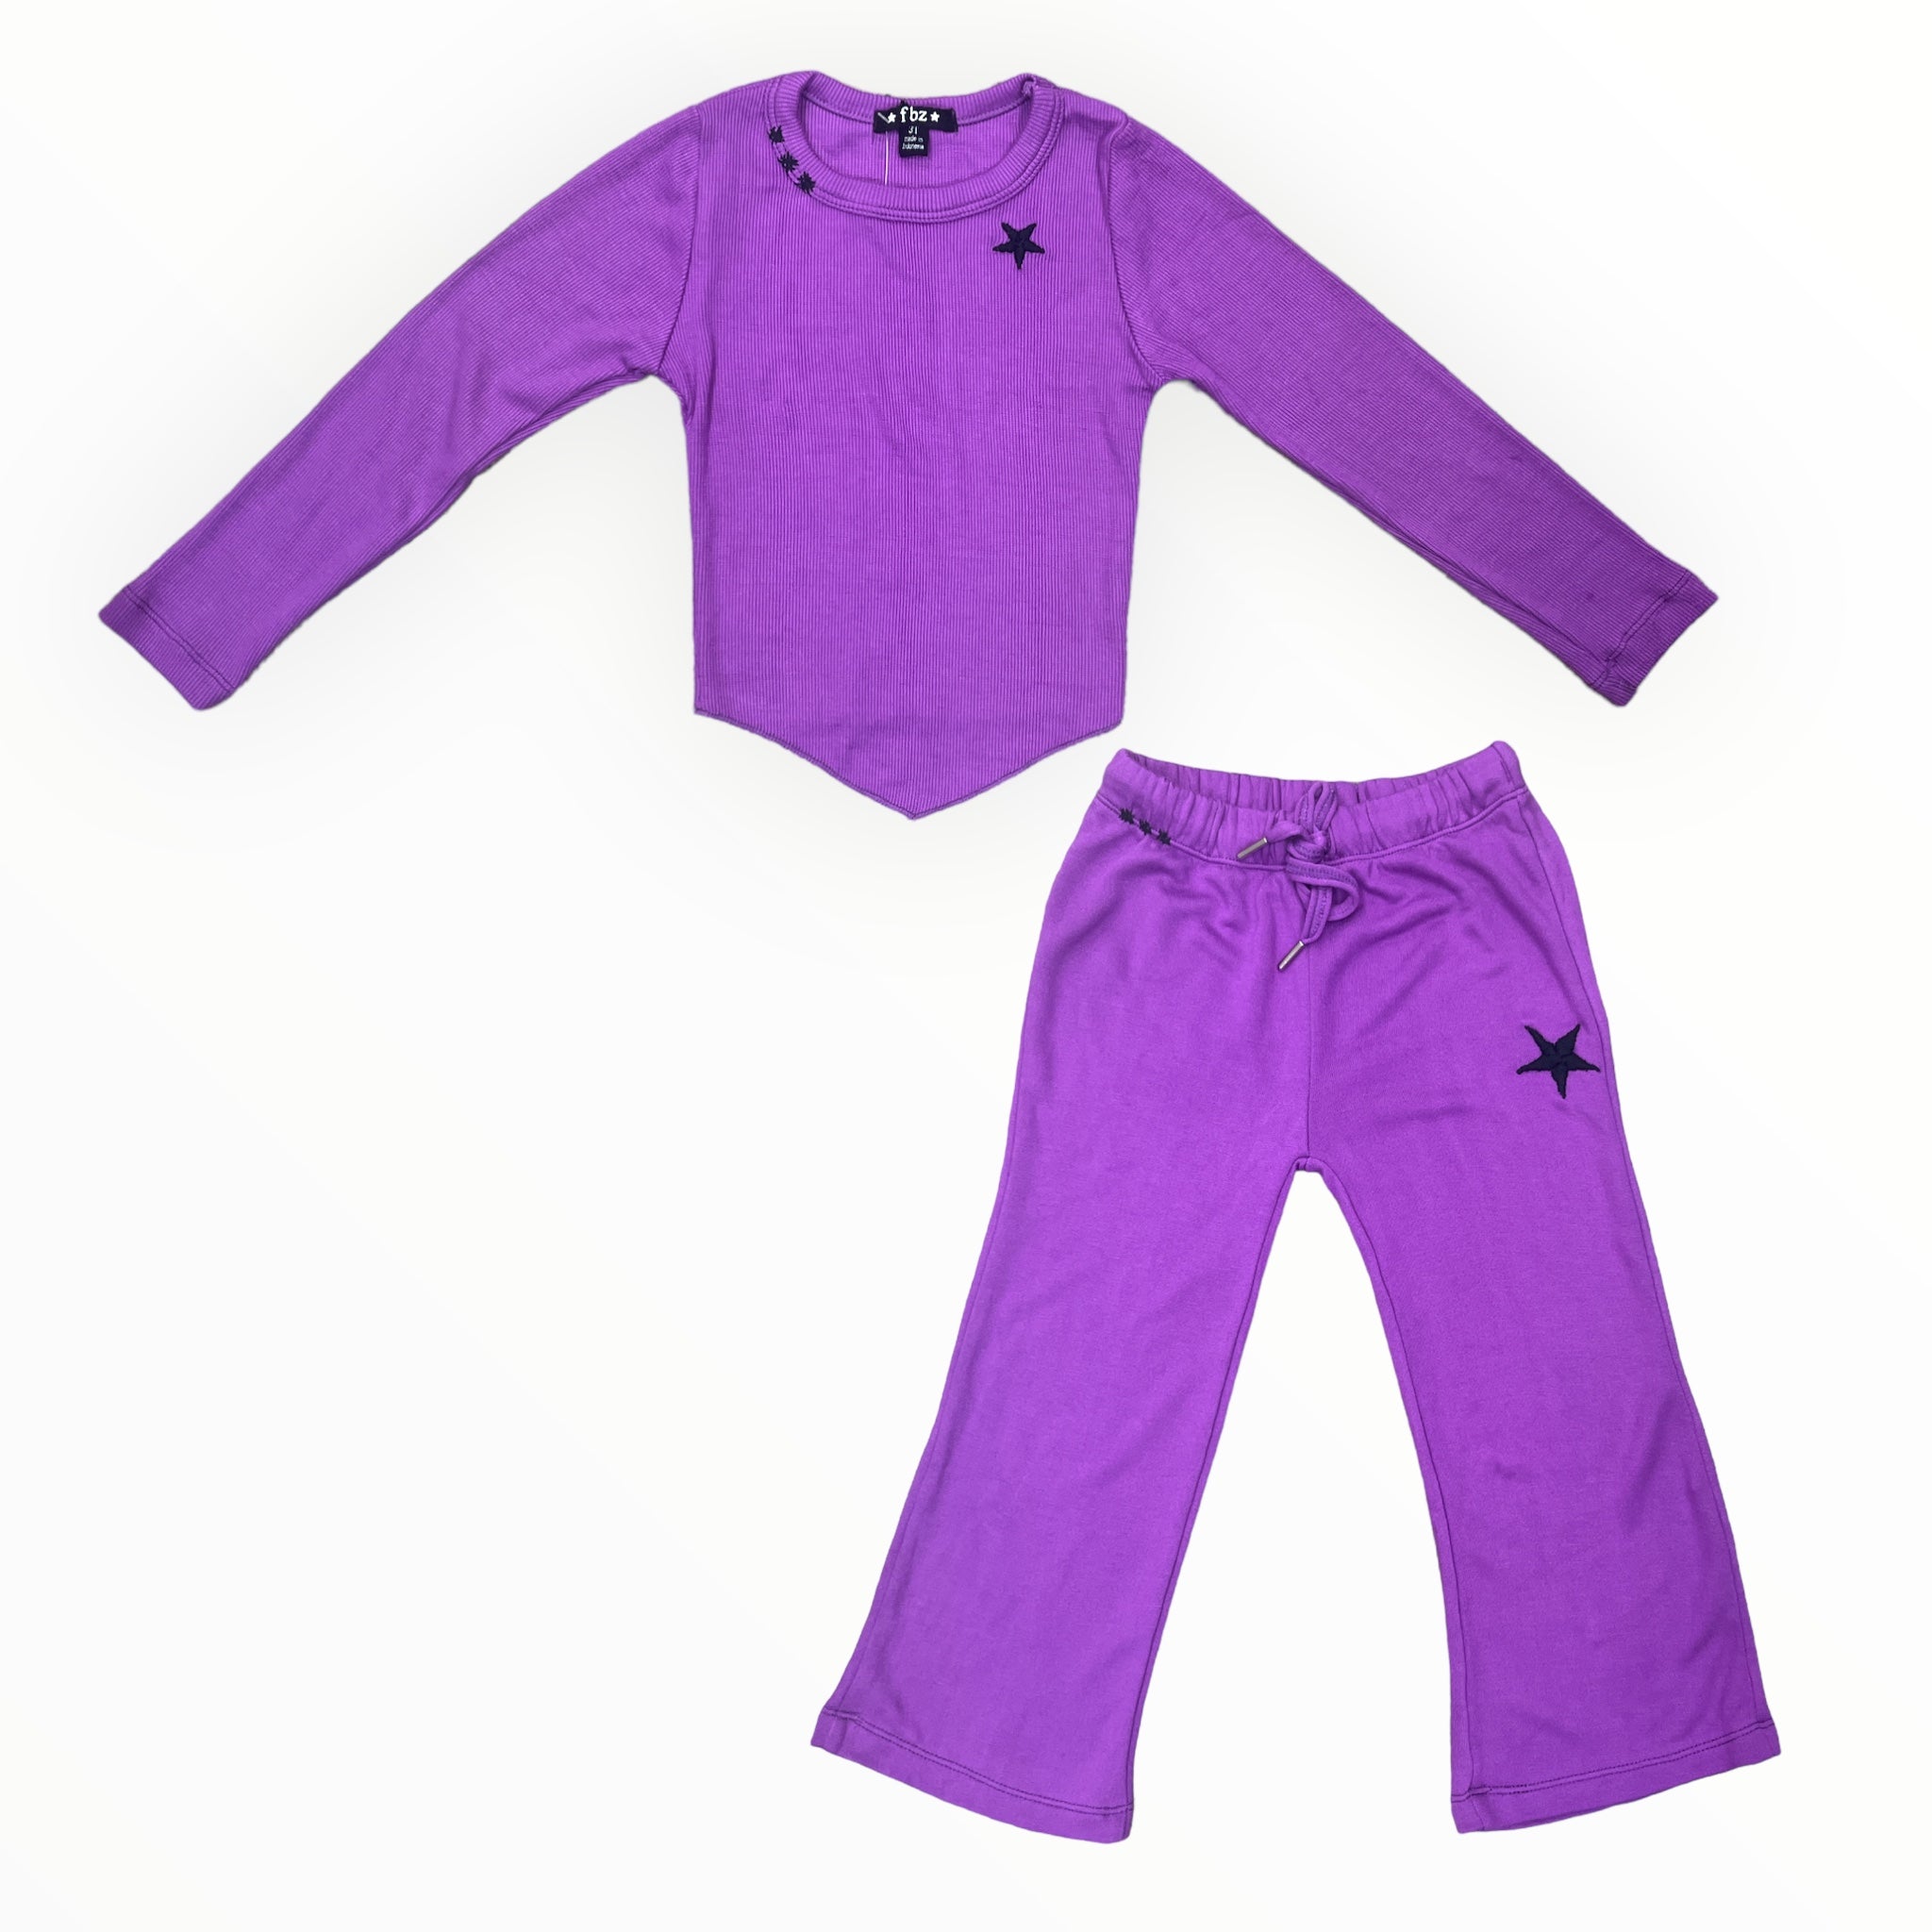 FLOWERS BY ZOE WIDE LEG SWEATPANT - PURPLE/EMBROIDERED STAR